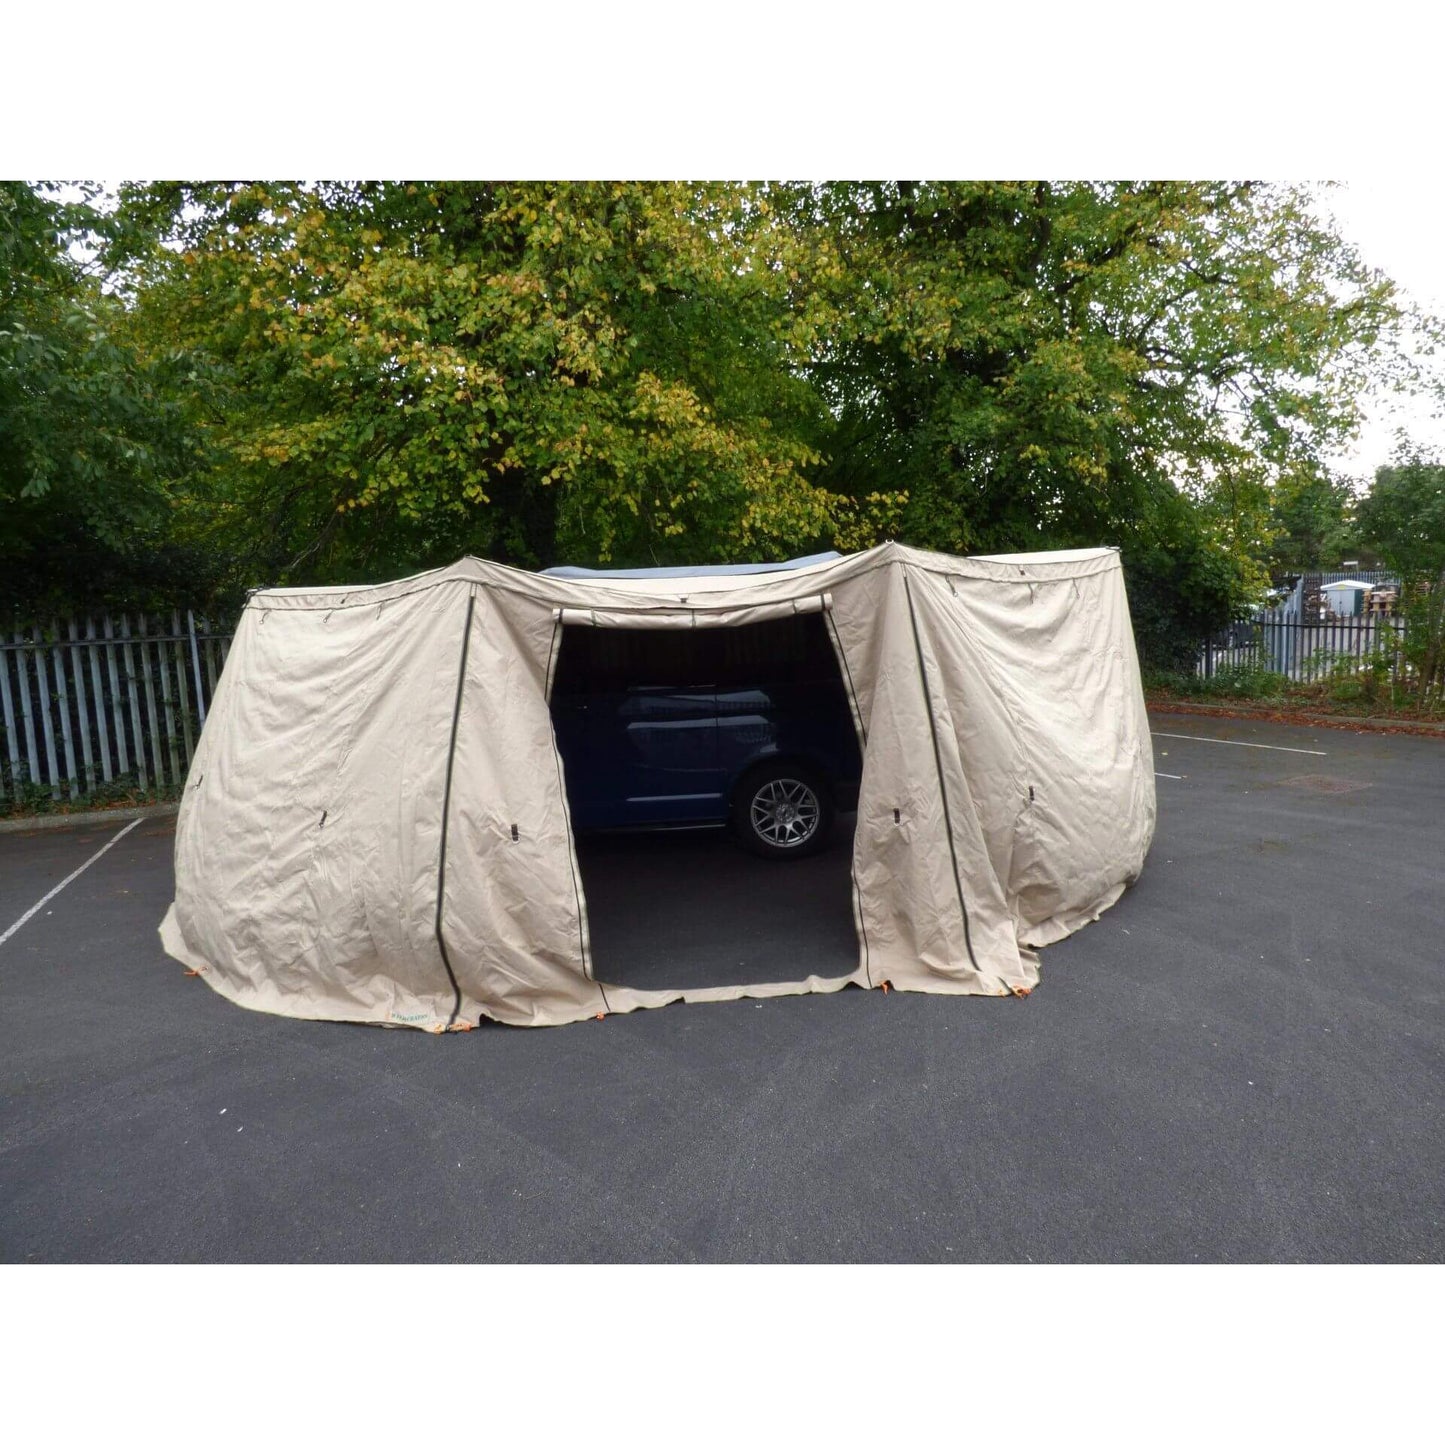 180 Granite Grey Expedition Foldout Vehicle Camping Side Awning + Side Walls -  - sold by Direct4x4